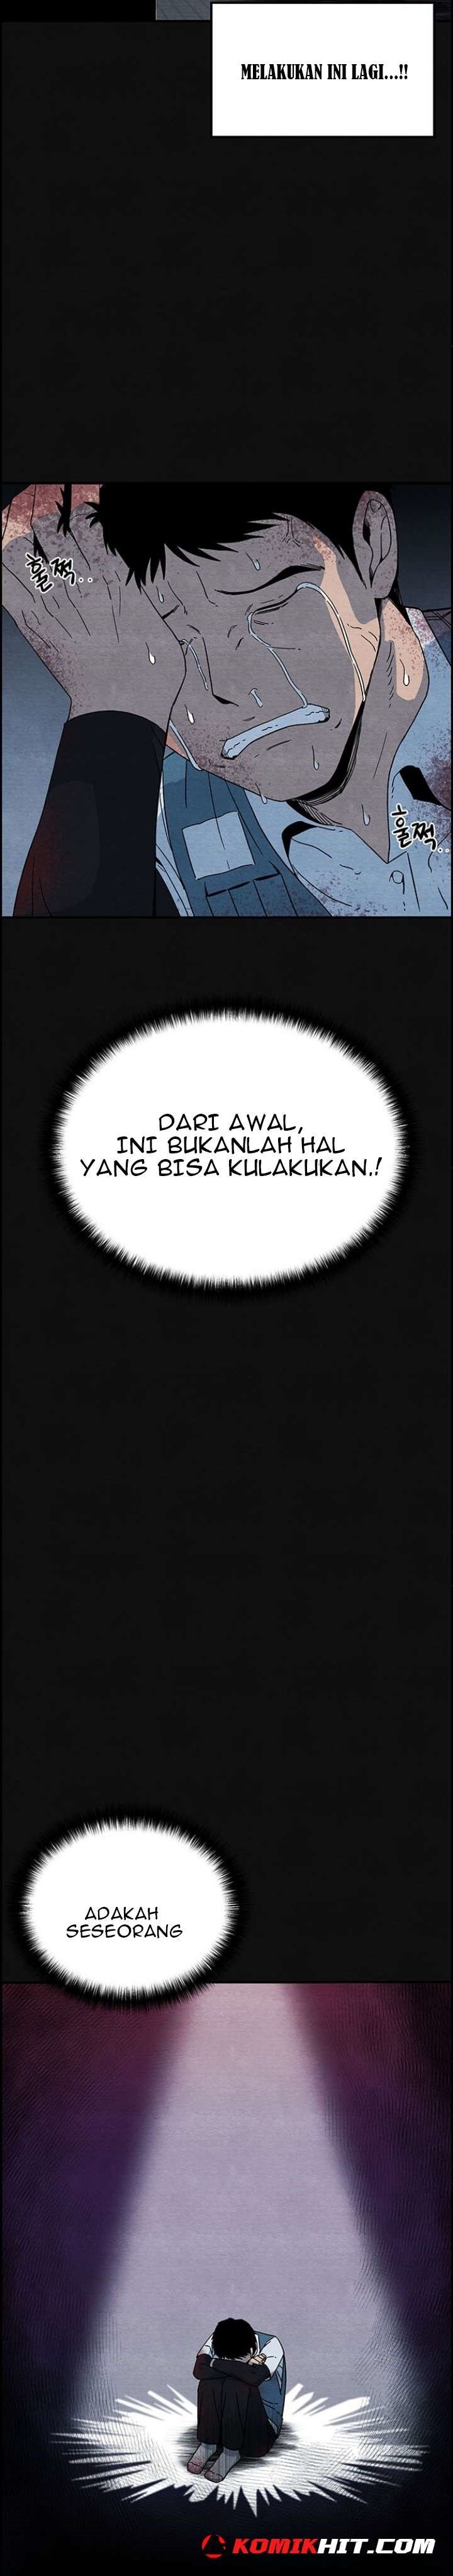 Baca The Courier Has Arrived Chapter 4  - GudangKomik